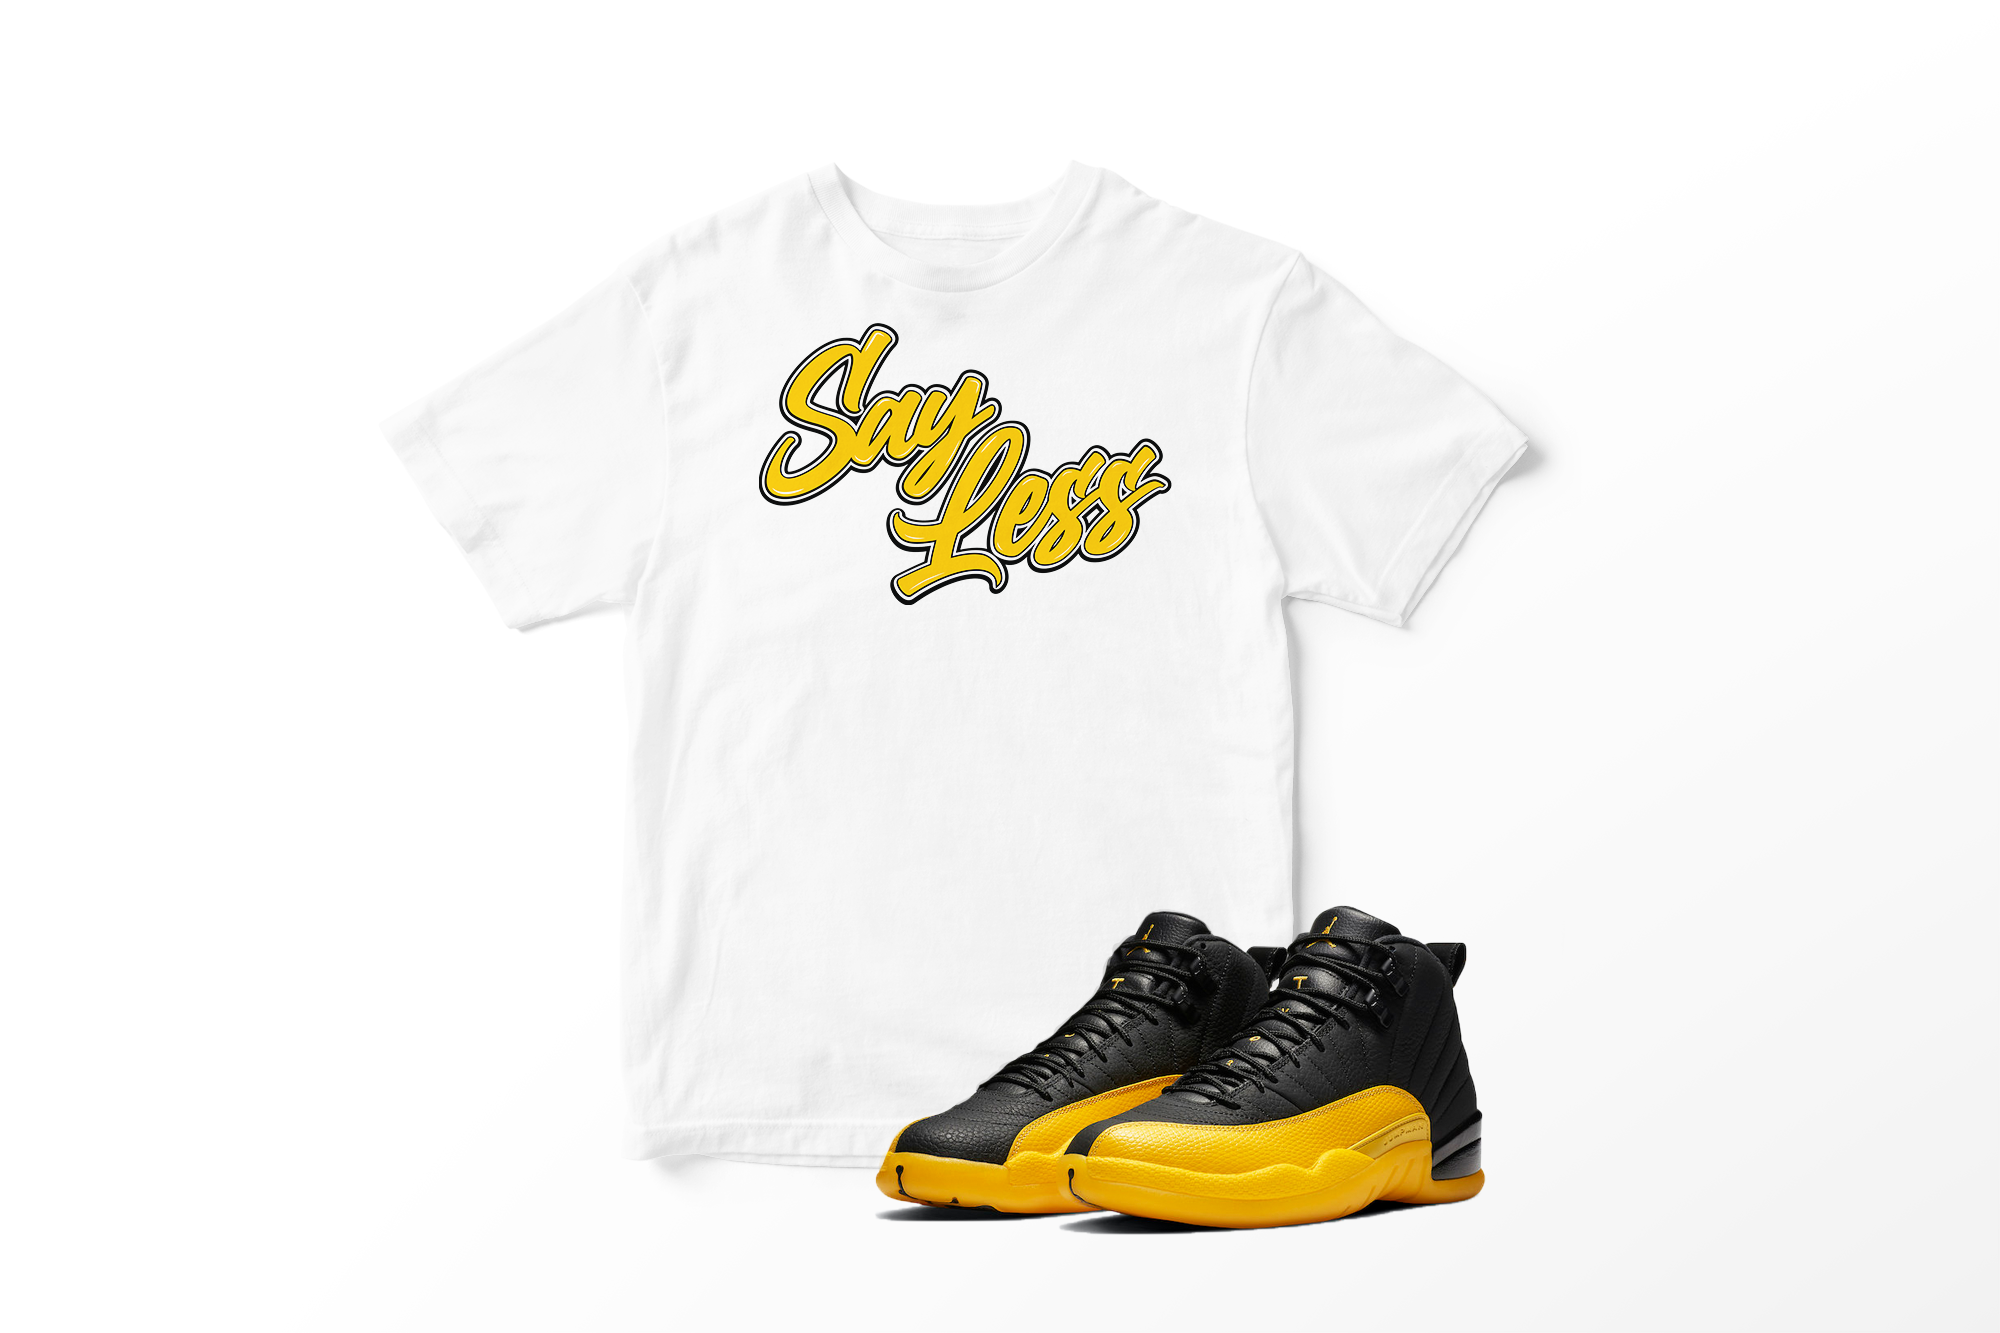 'Say Less' in University Gold CW Short Sleeve Tee